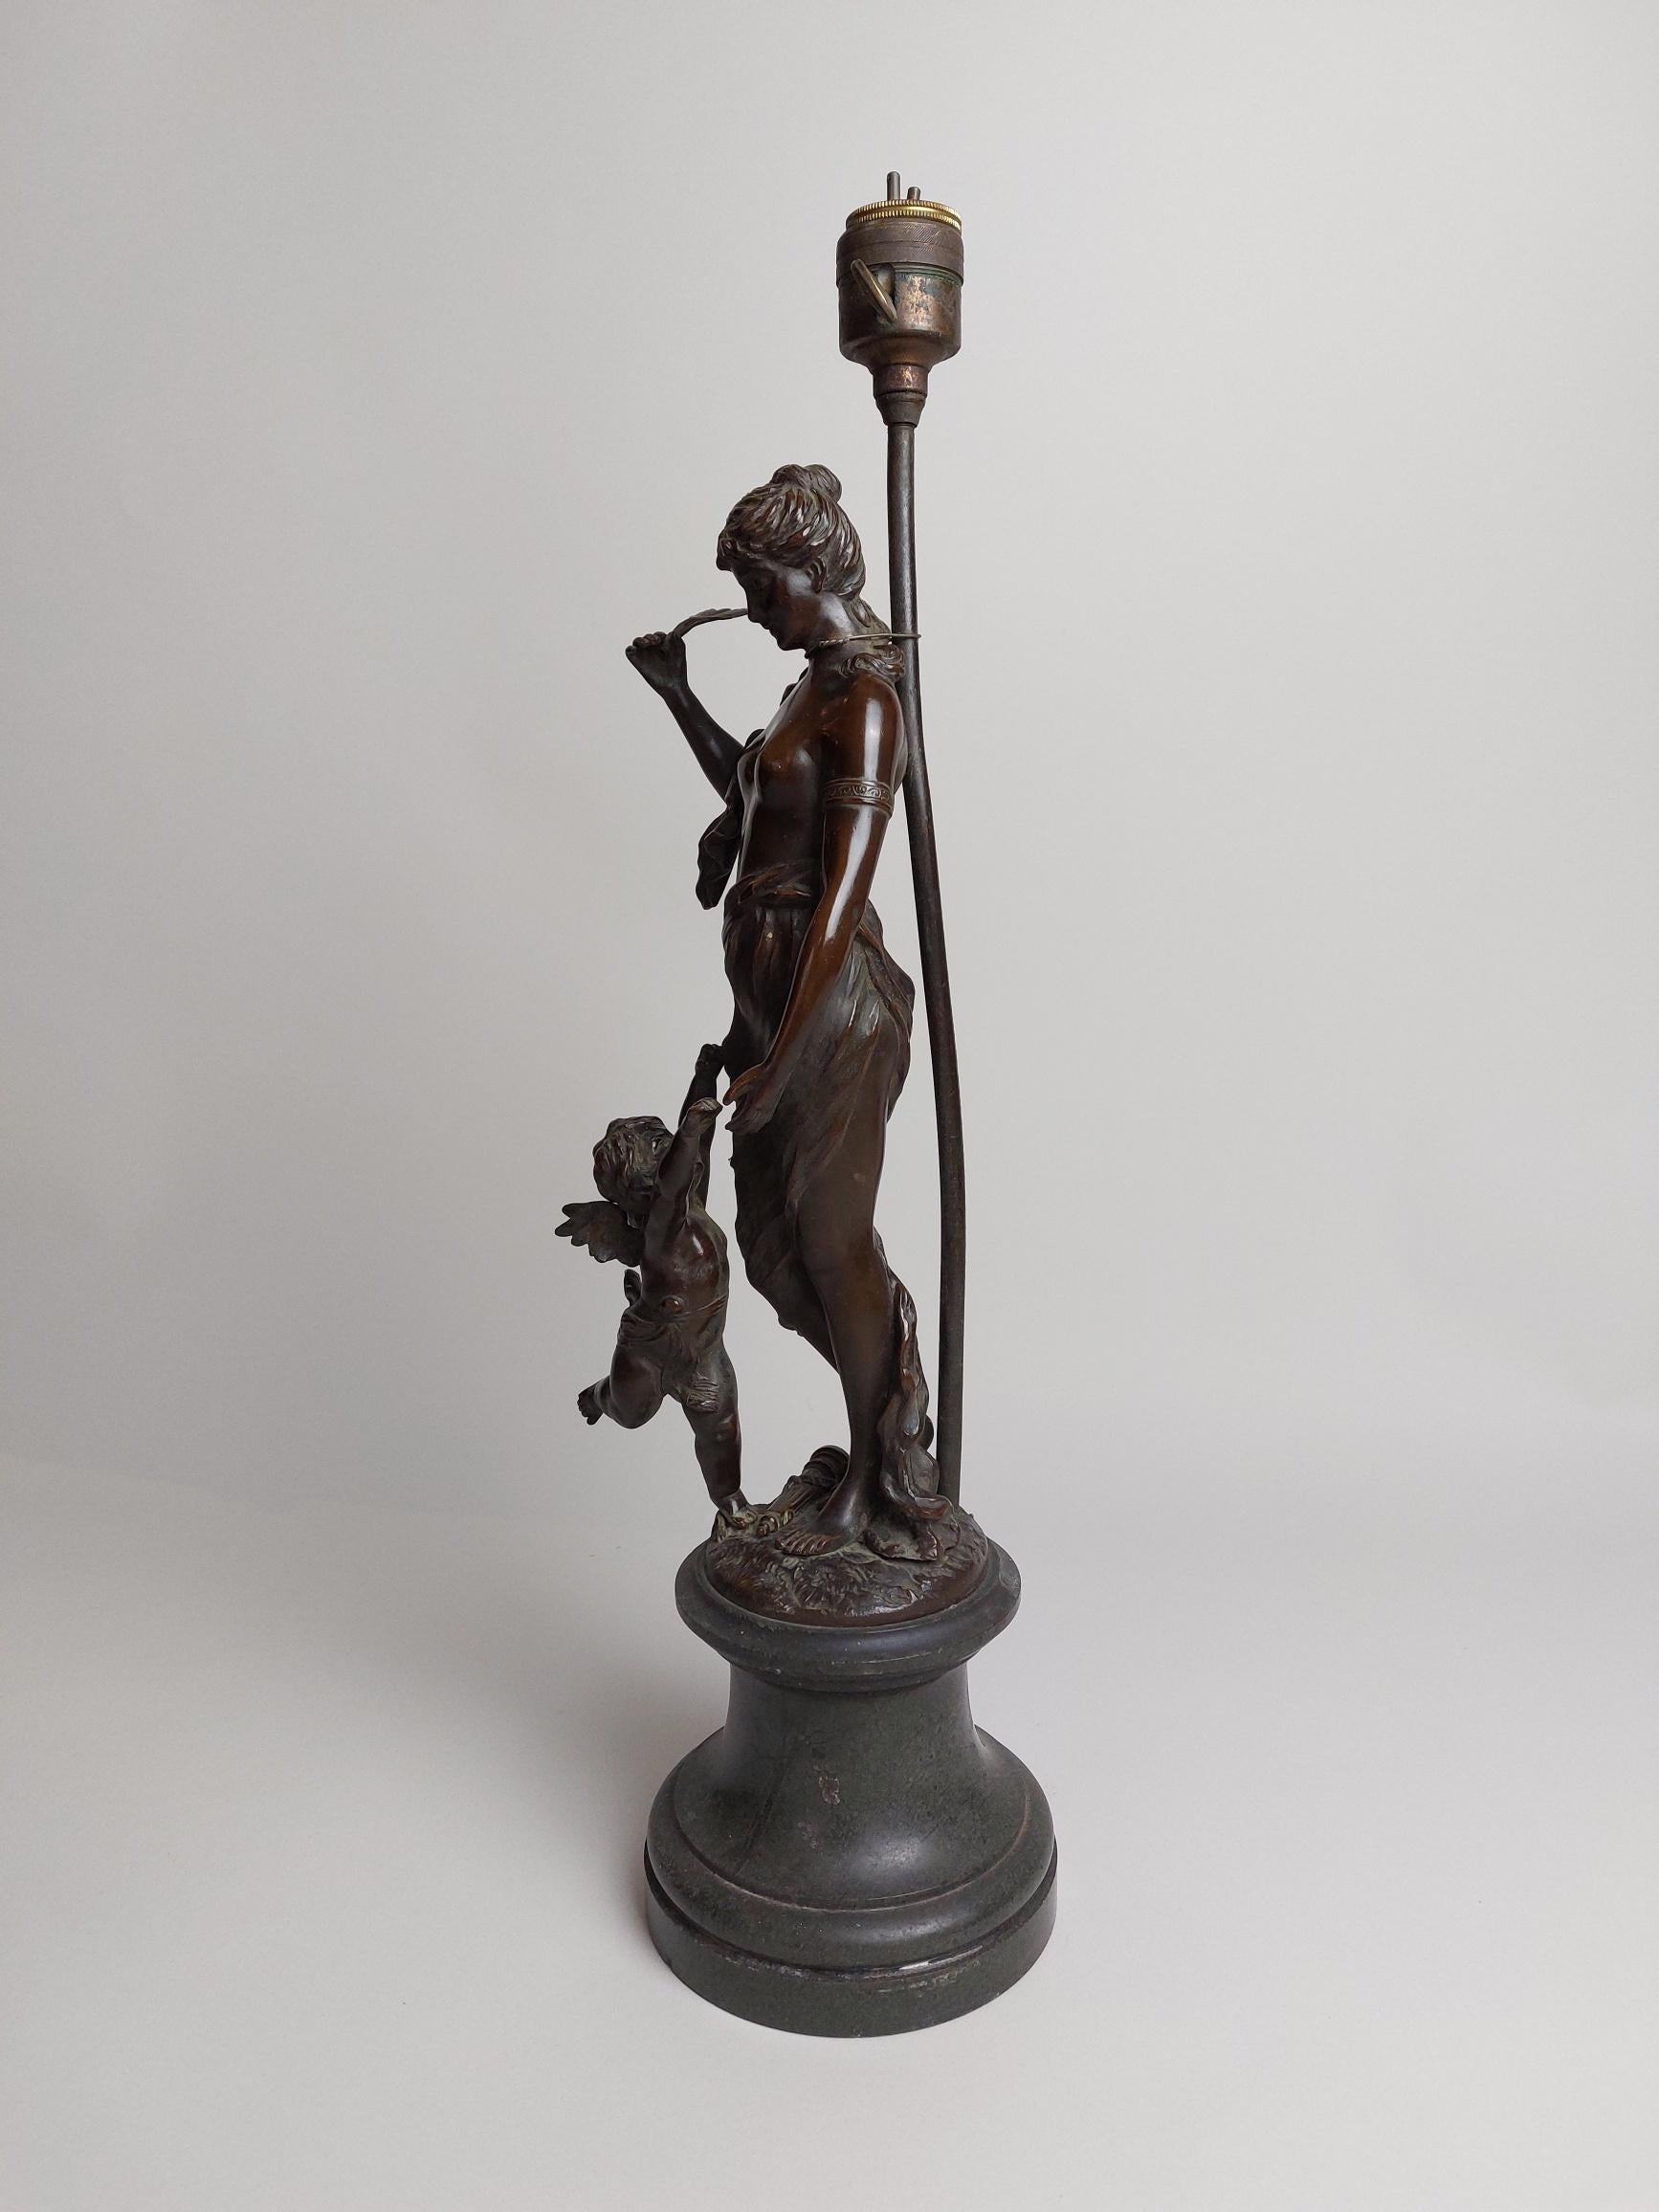 A stylish 19th century bronze lamp base in the form of a half nude lady with a winged cherub (putto) at her feet.
Please note this is sold as seen the lamp fitting does not work and will need rewiring.